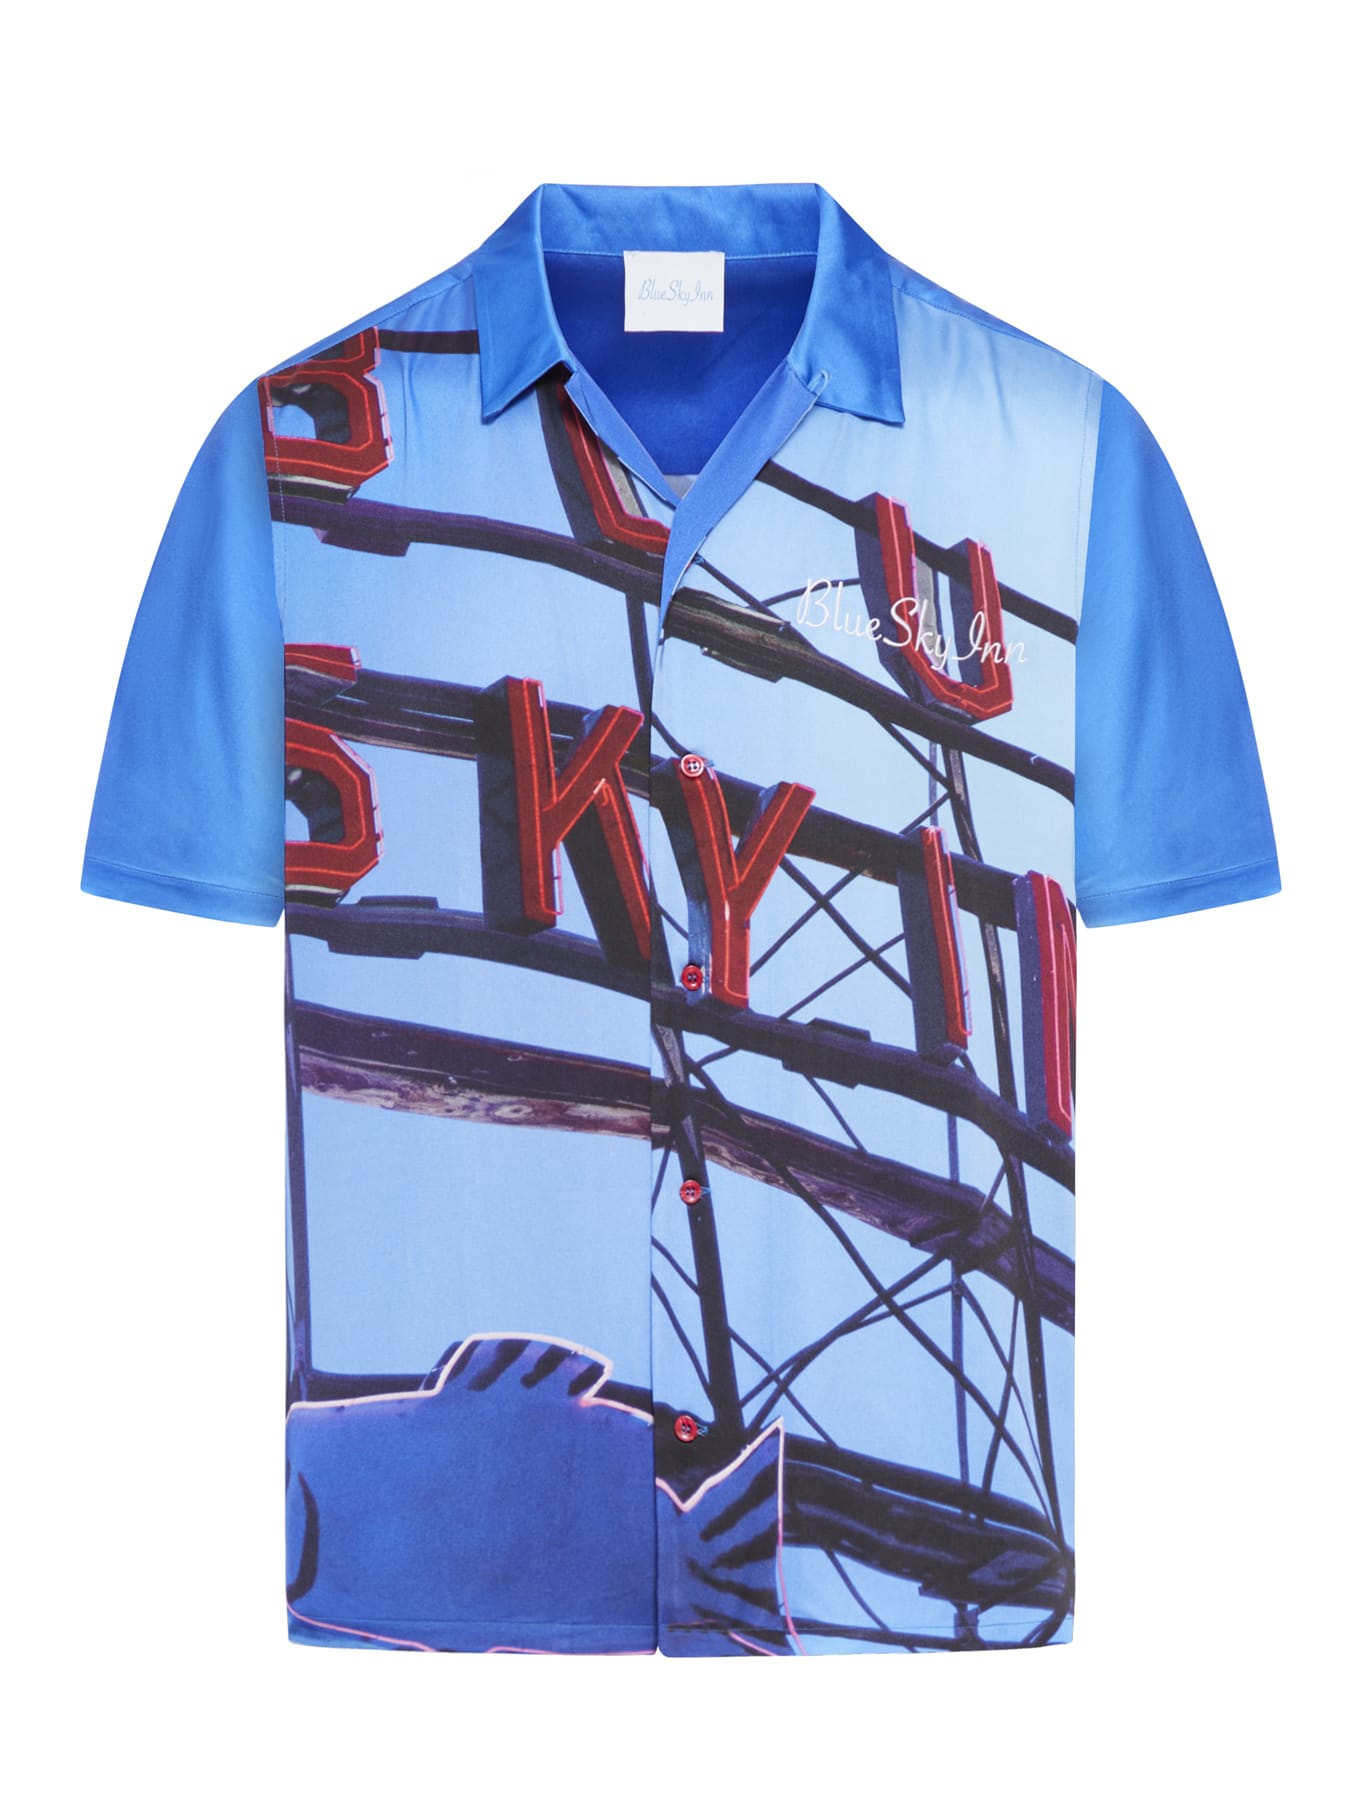 Blue Sky Inn Red Neon Sign Shirt In Red Red Neon